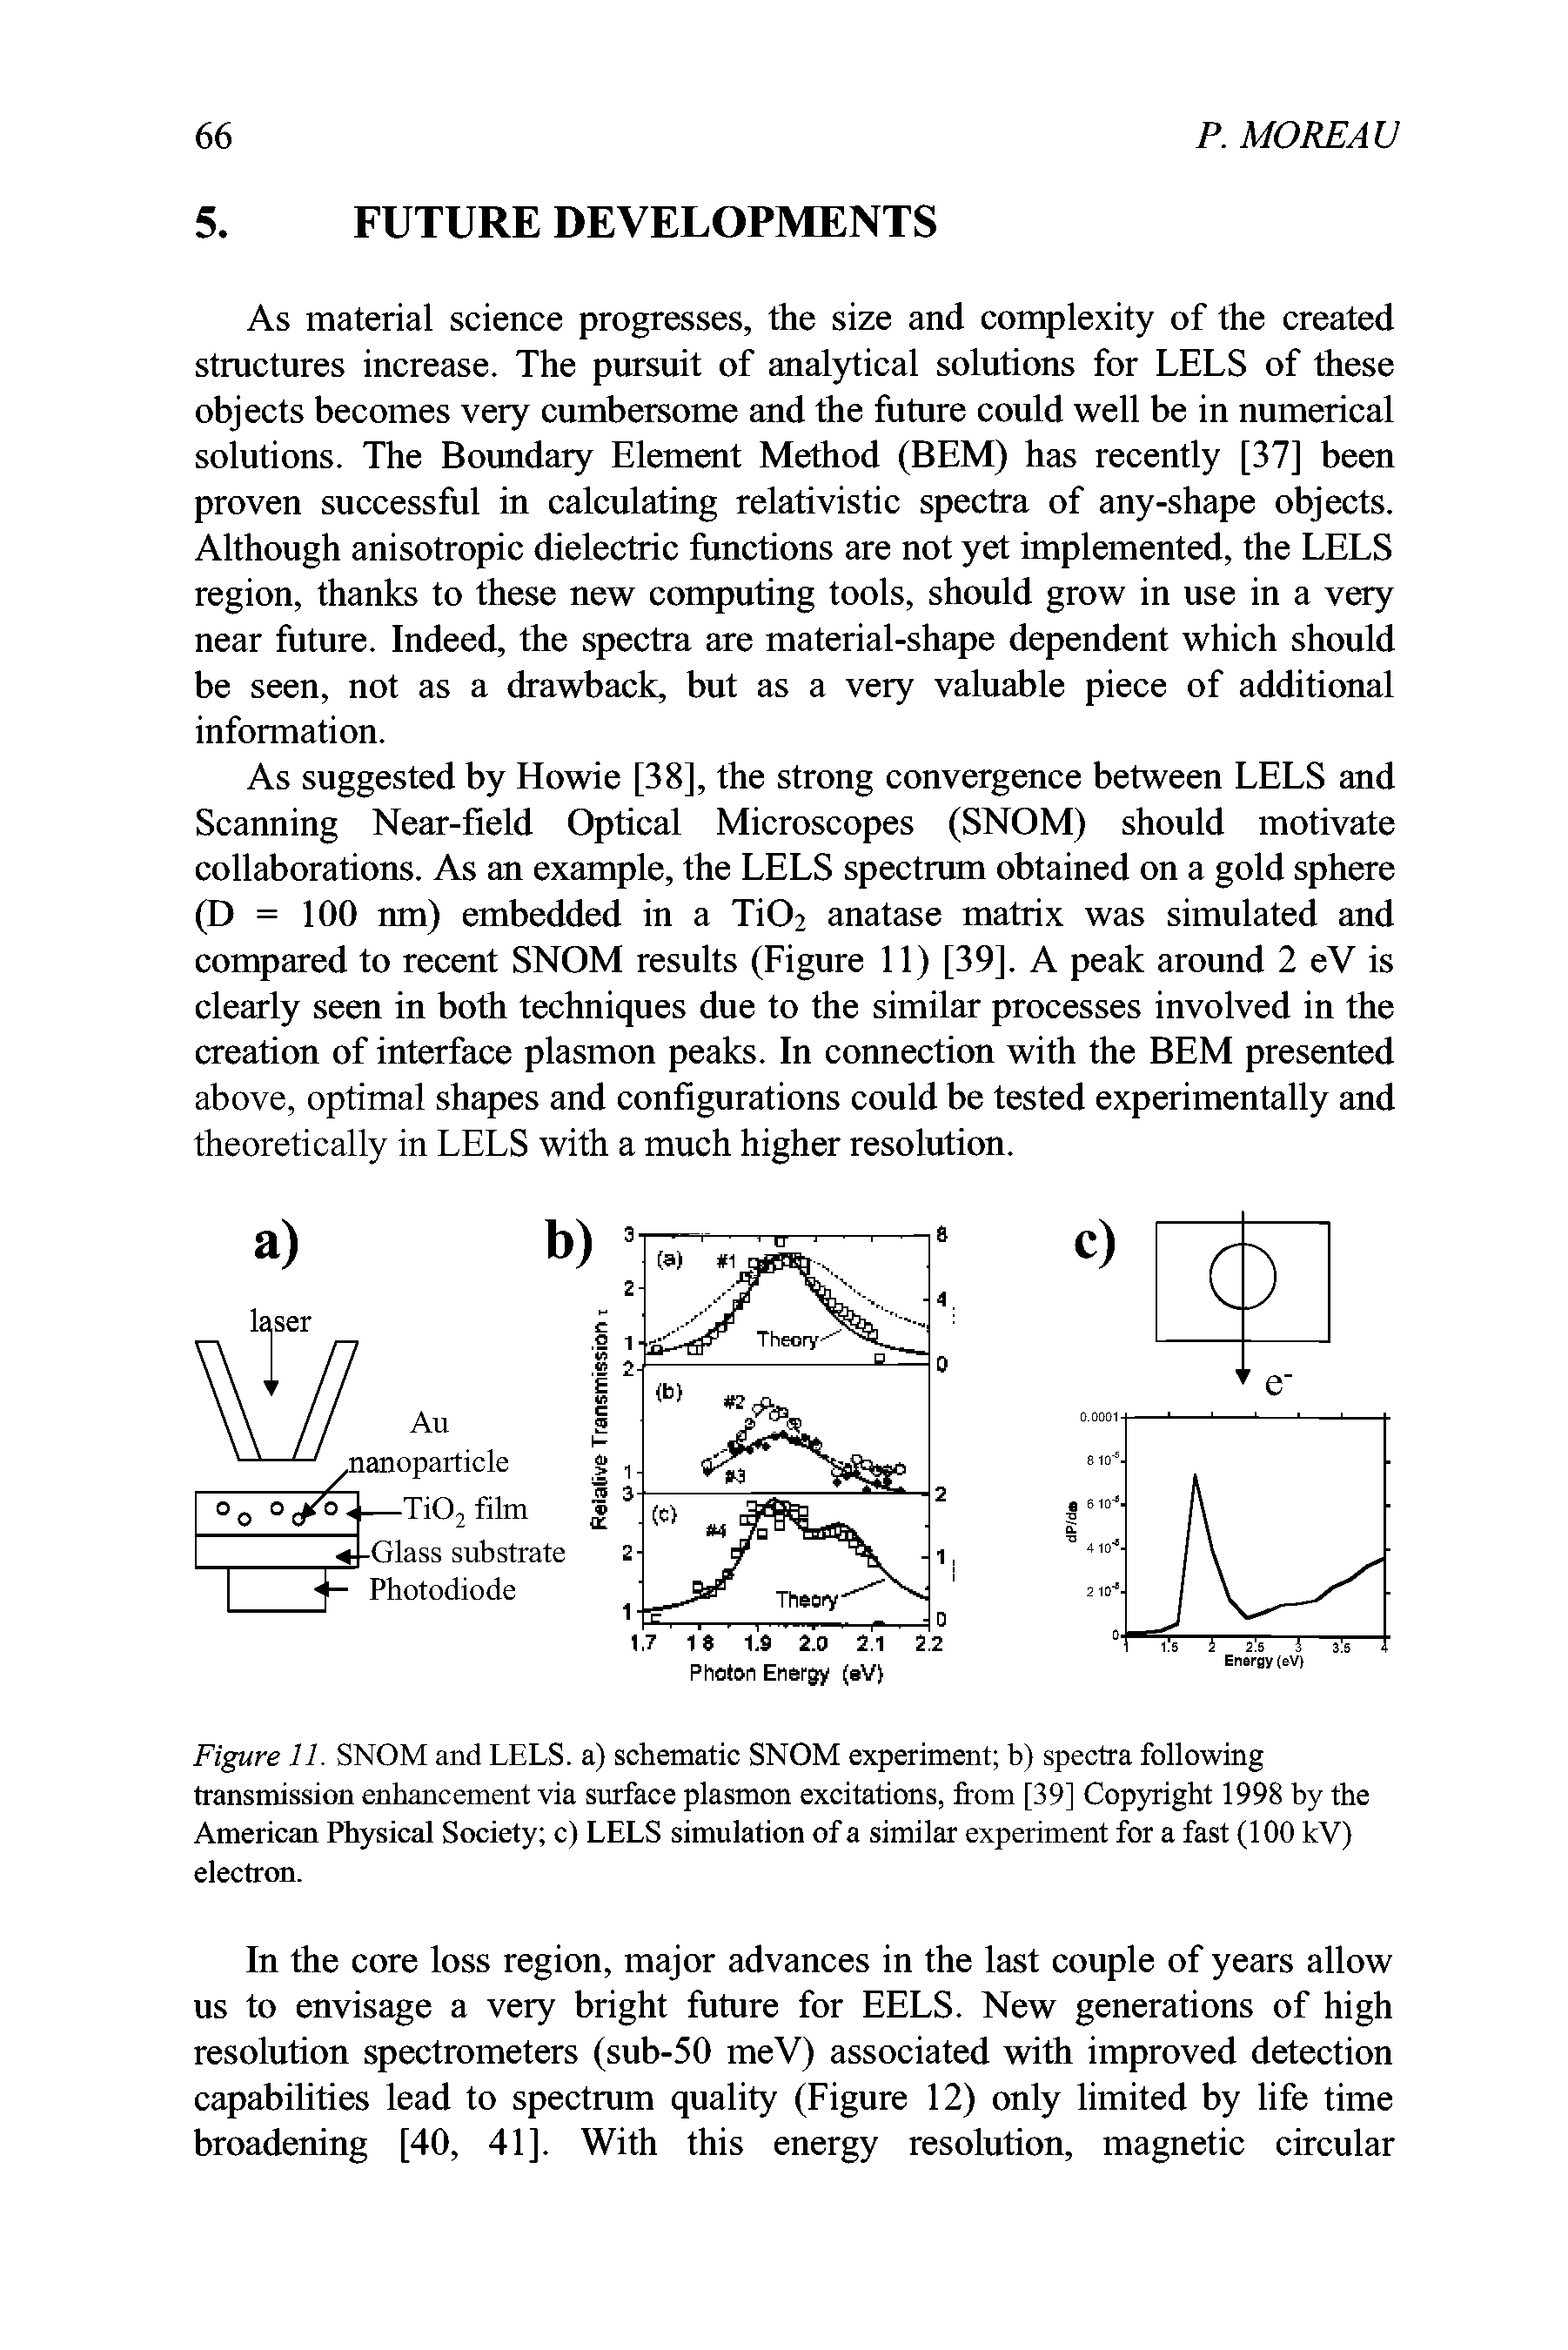 Figure 11. SNOM and LELS. a) schematic SNOM experiment b) spectra following transmission enhancement via surface plasmon excitations, from [39] Copyright 1998 by the American Physical Society c) LELS simulation of a similar experiment for a fast (100 kV) electron.